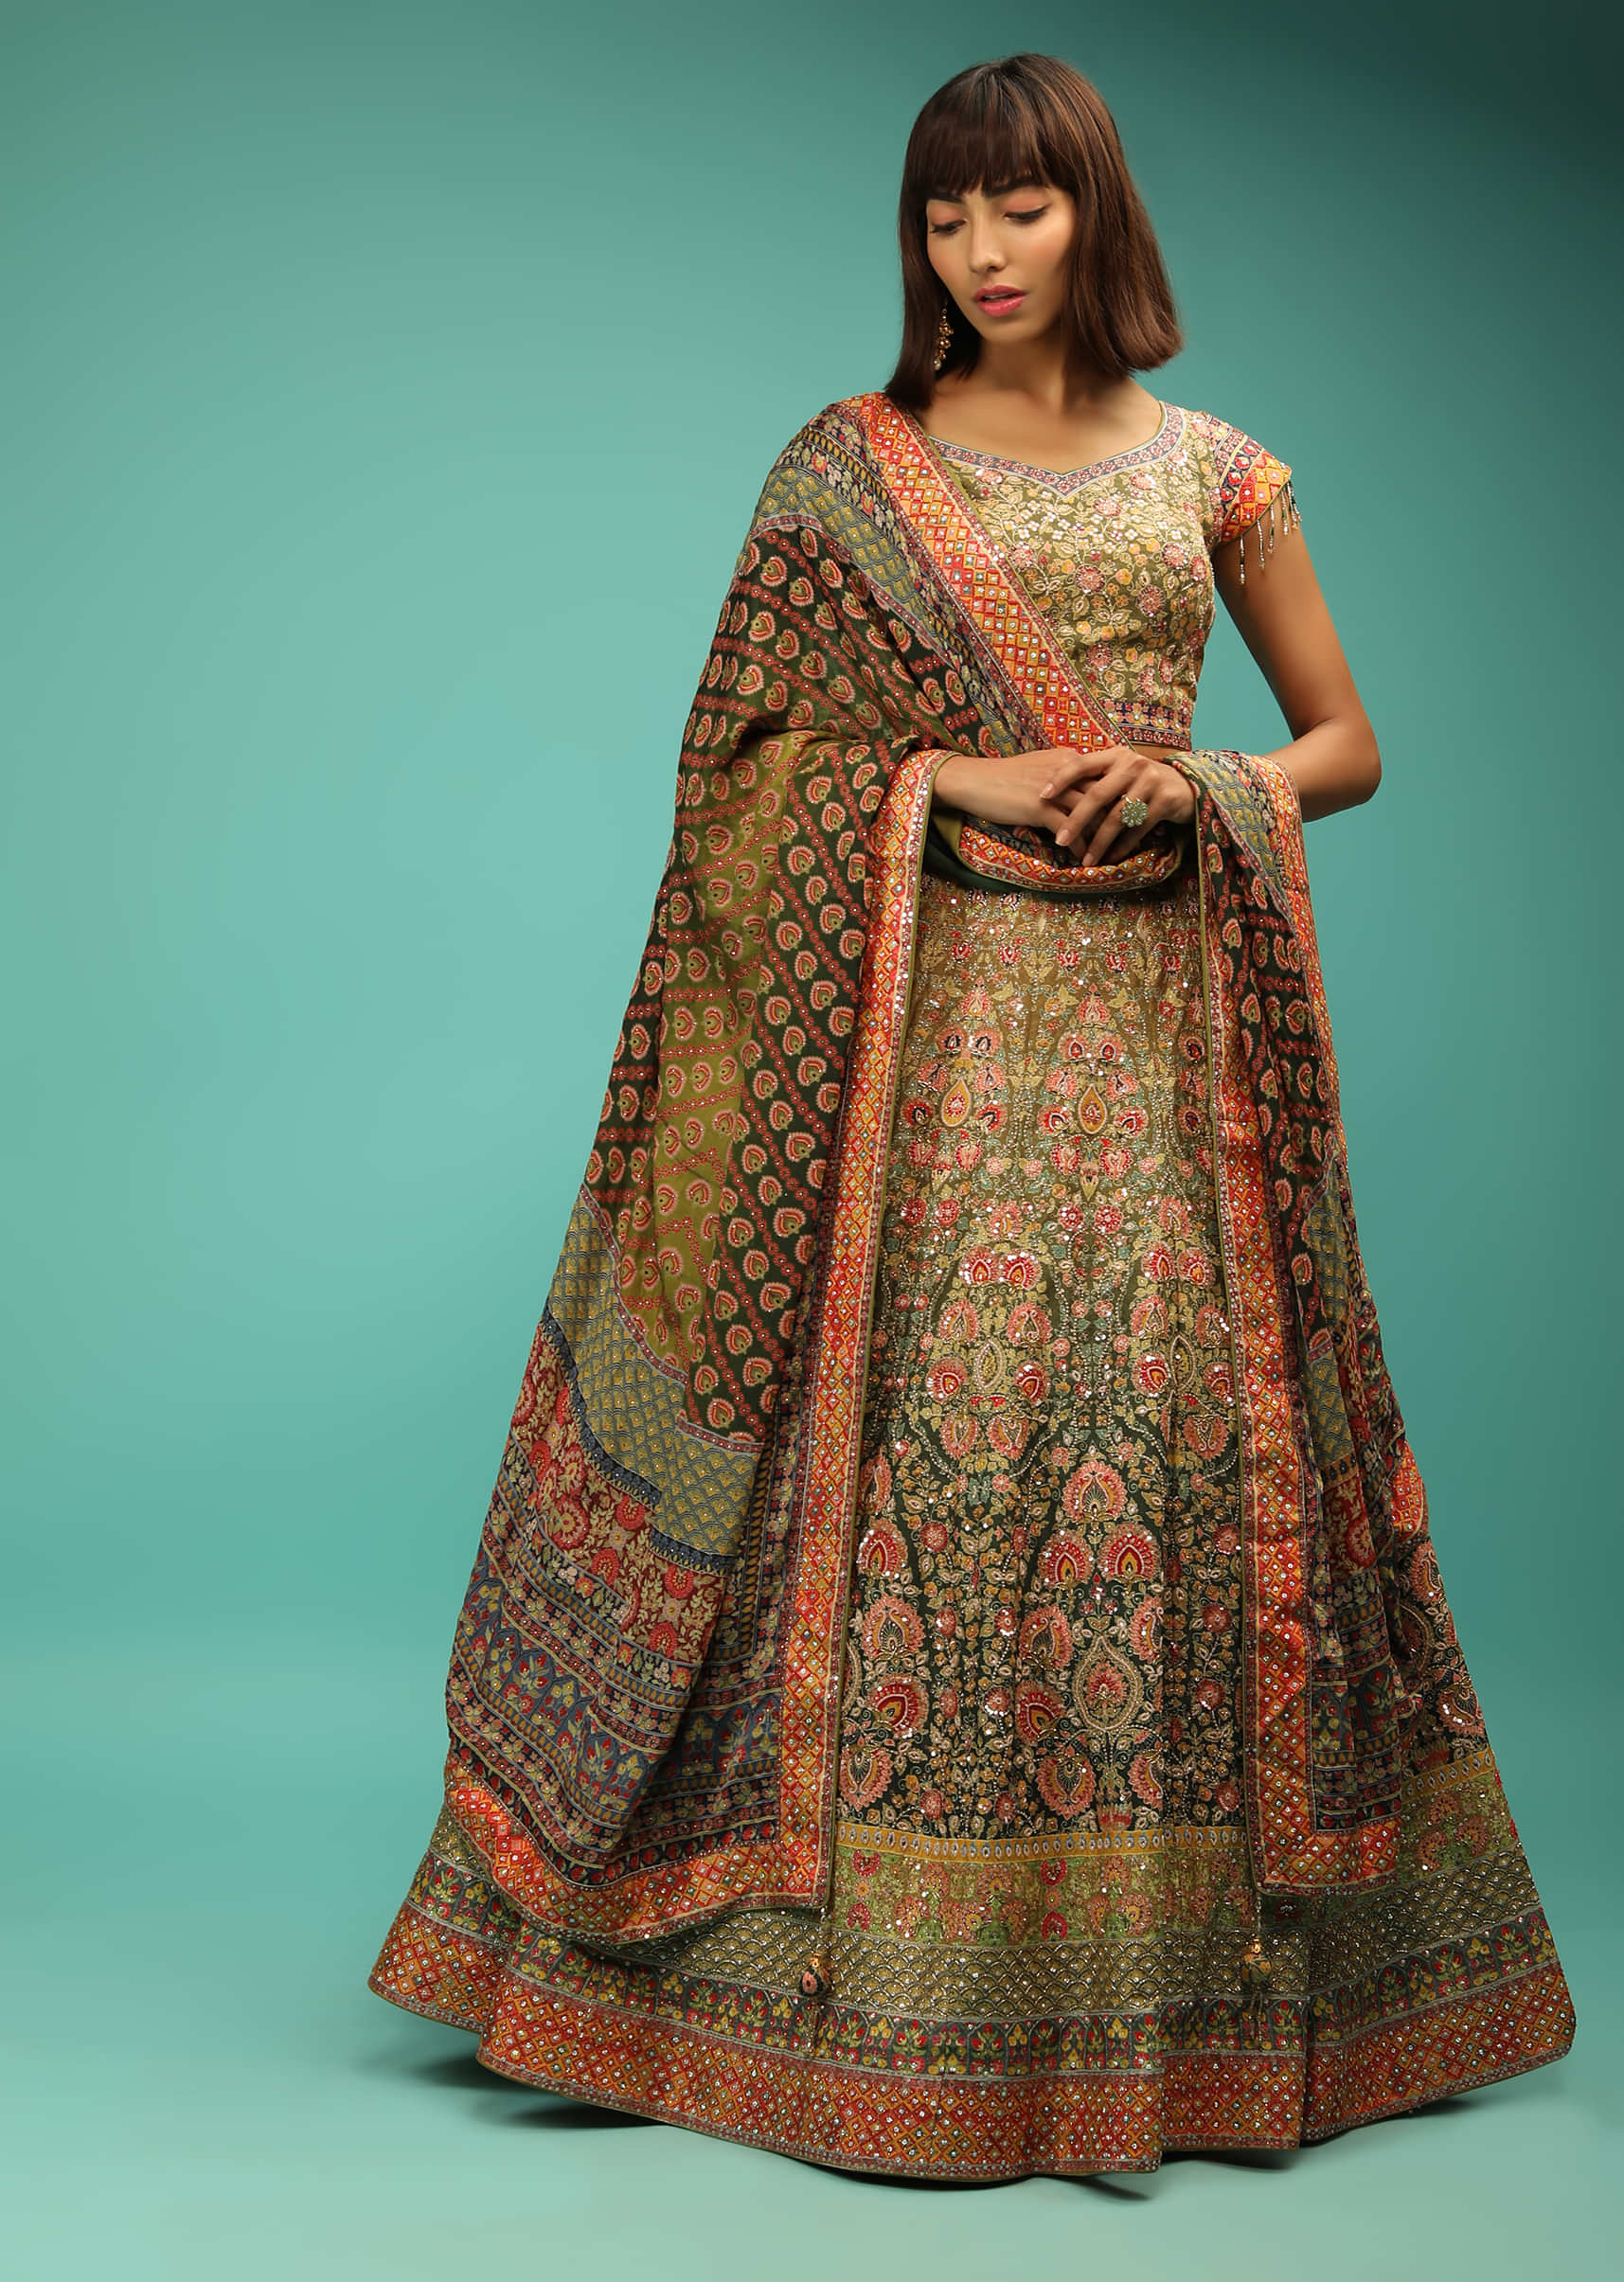 Olive Green Shaded Lehenga Choli With Floral Print And Bead Accents 